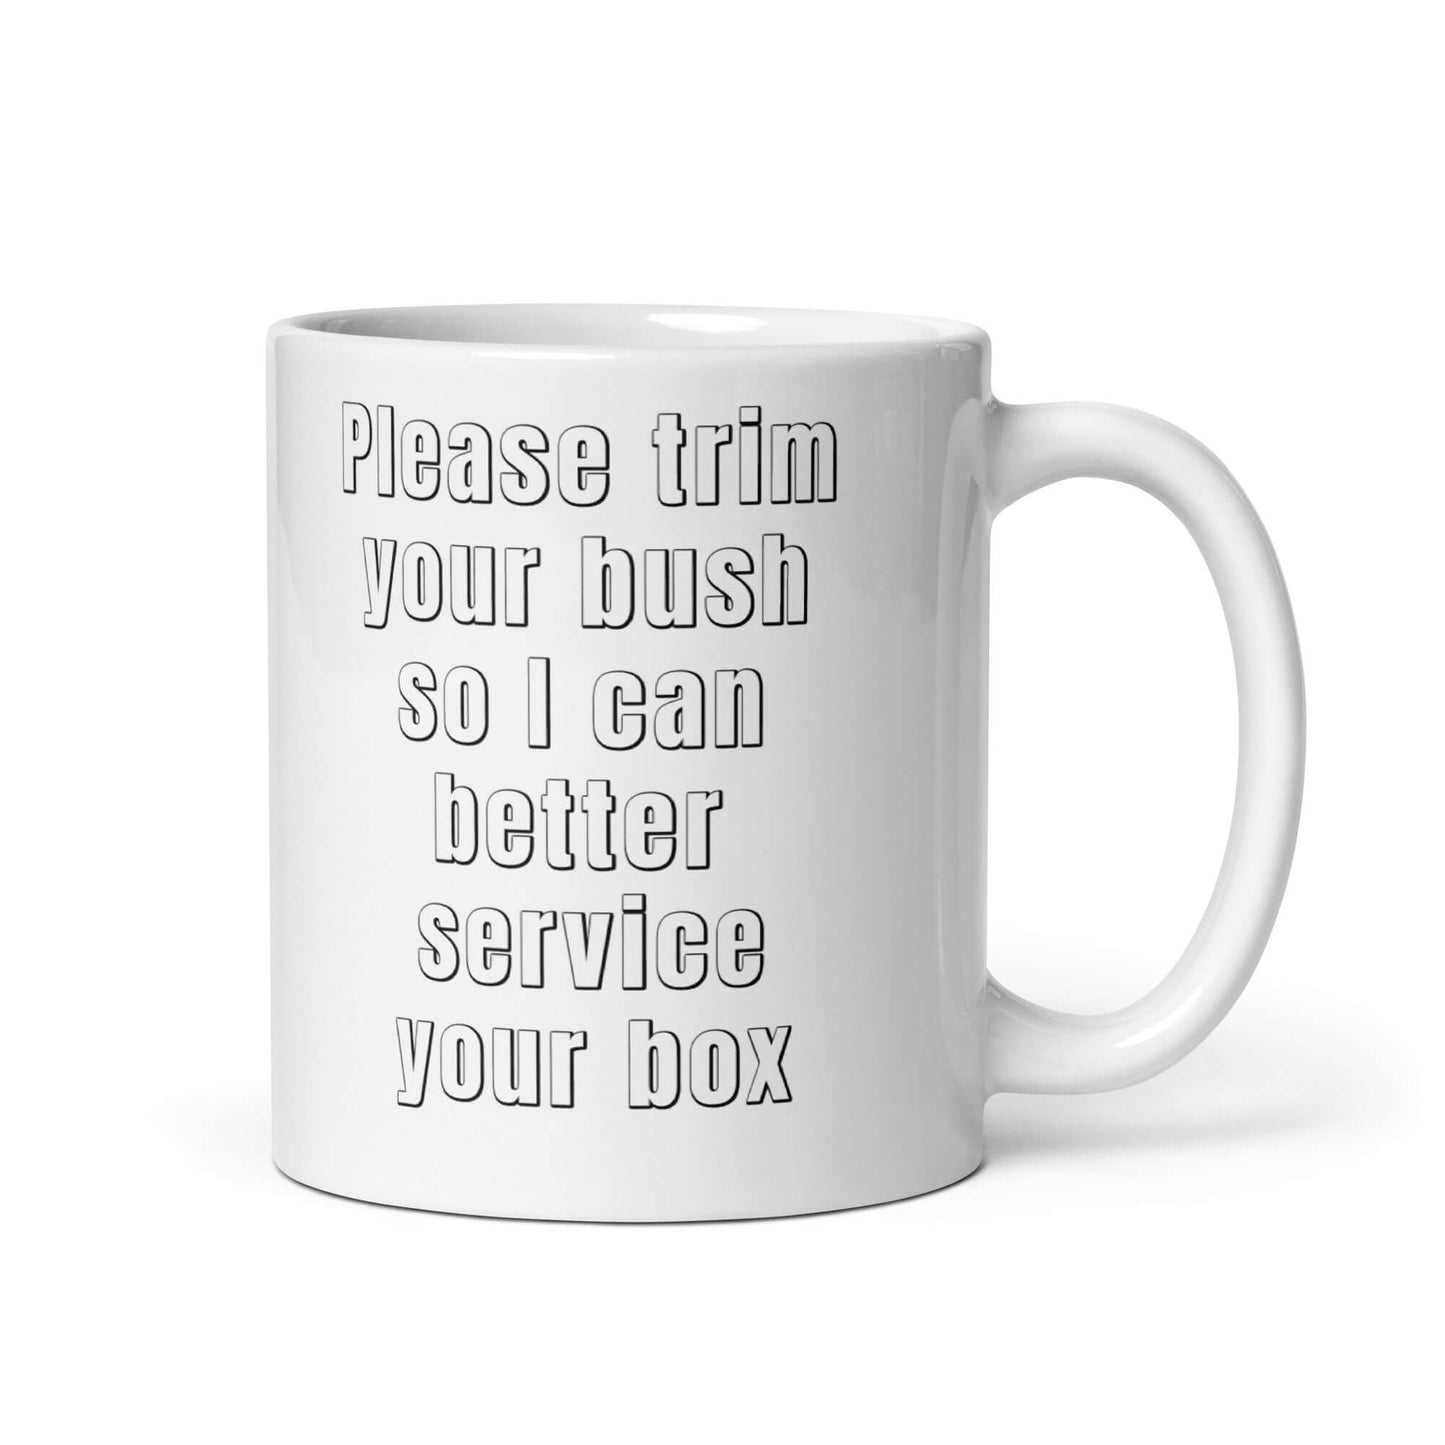 Please trim your bush so I can better service your box - White glossy mug - Horrible Designs